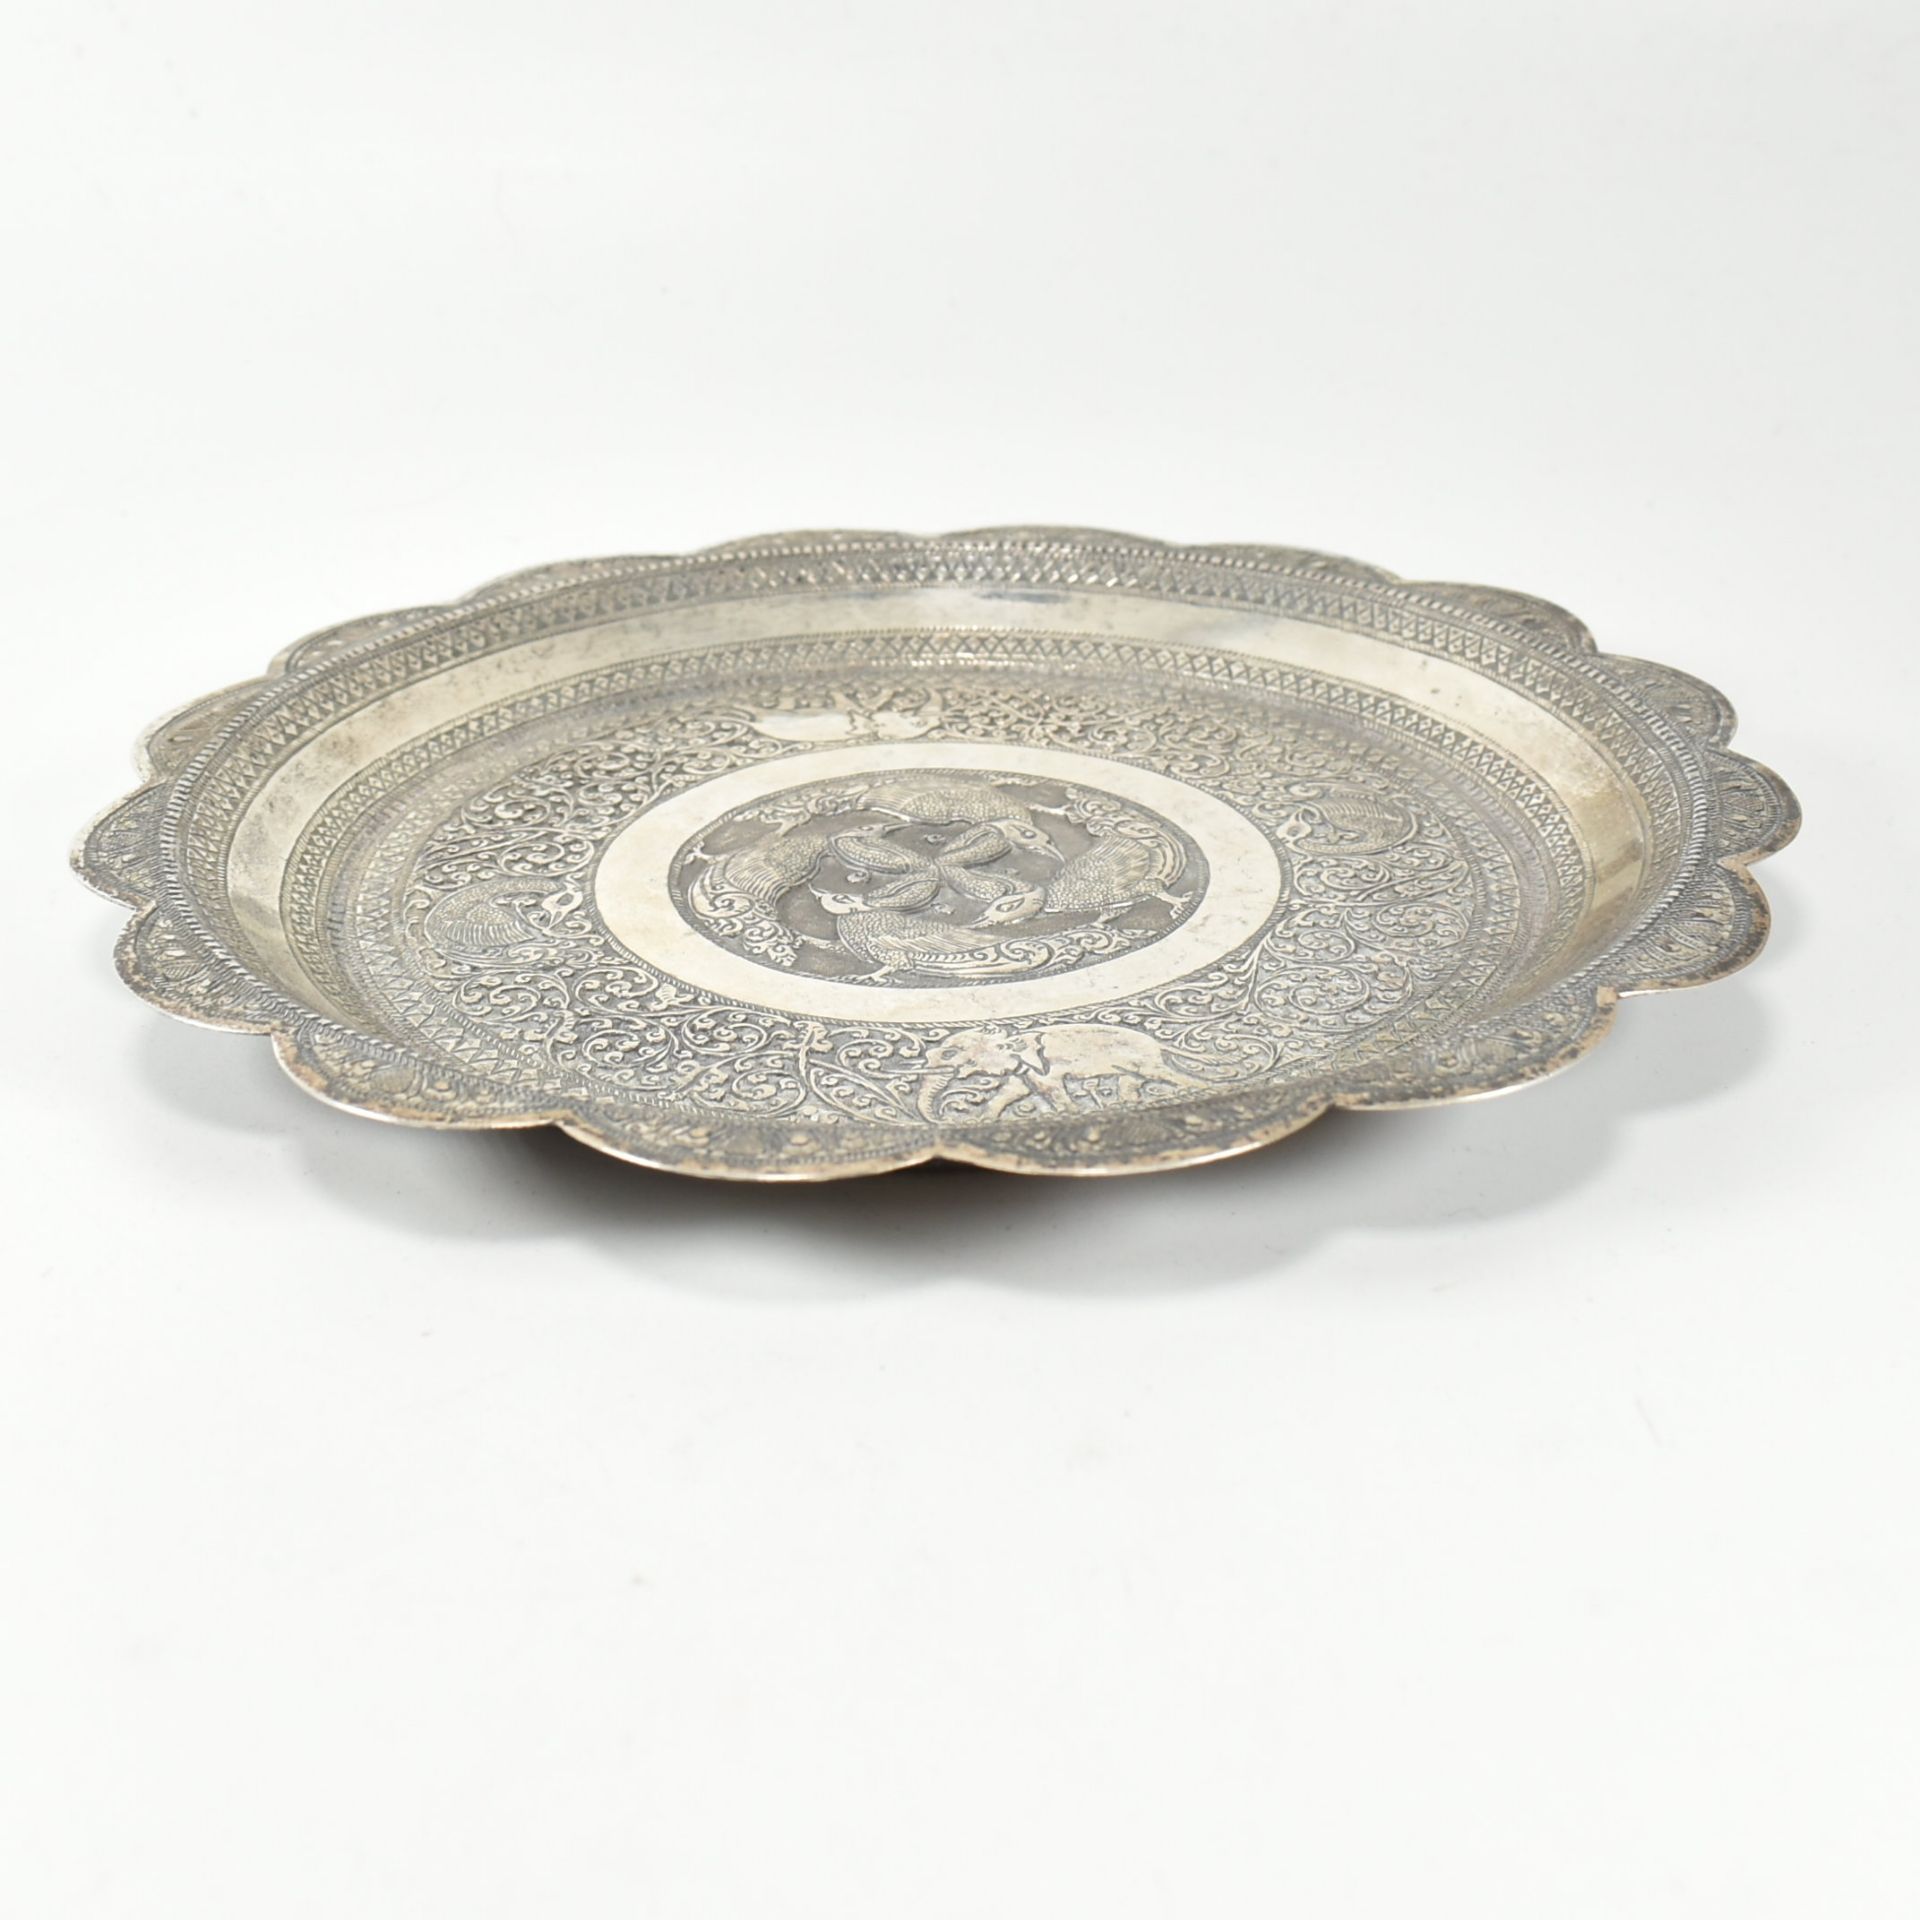 MIDDLE EASTERN WHITE METAL TRAY - Image 2 of 5